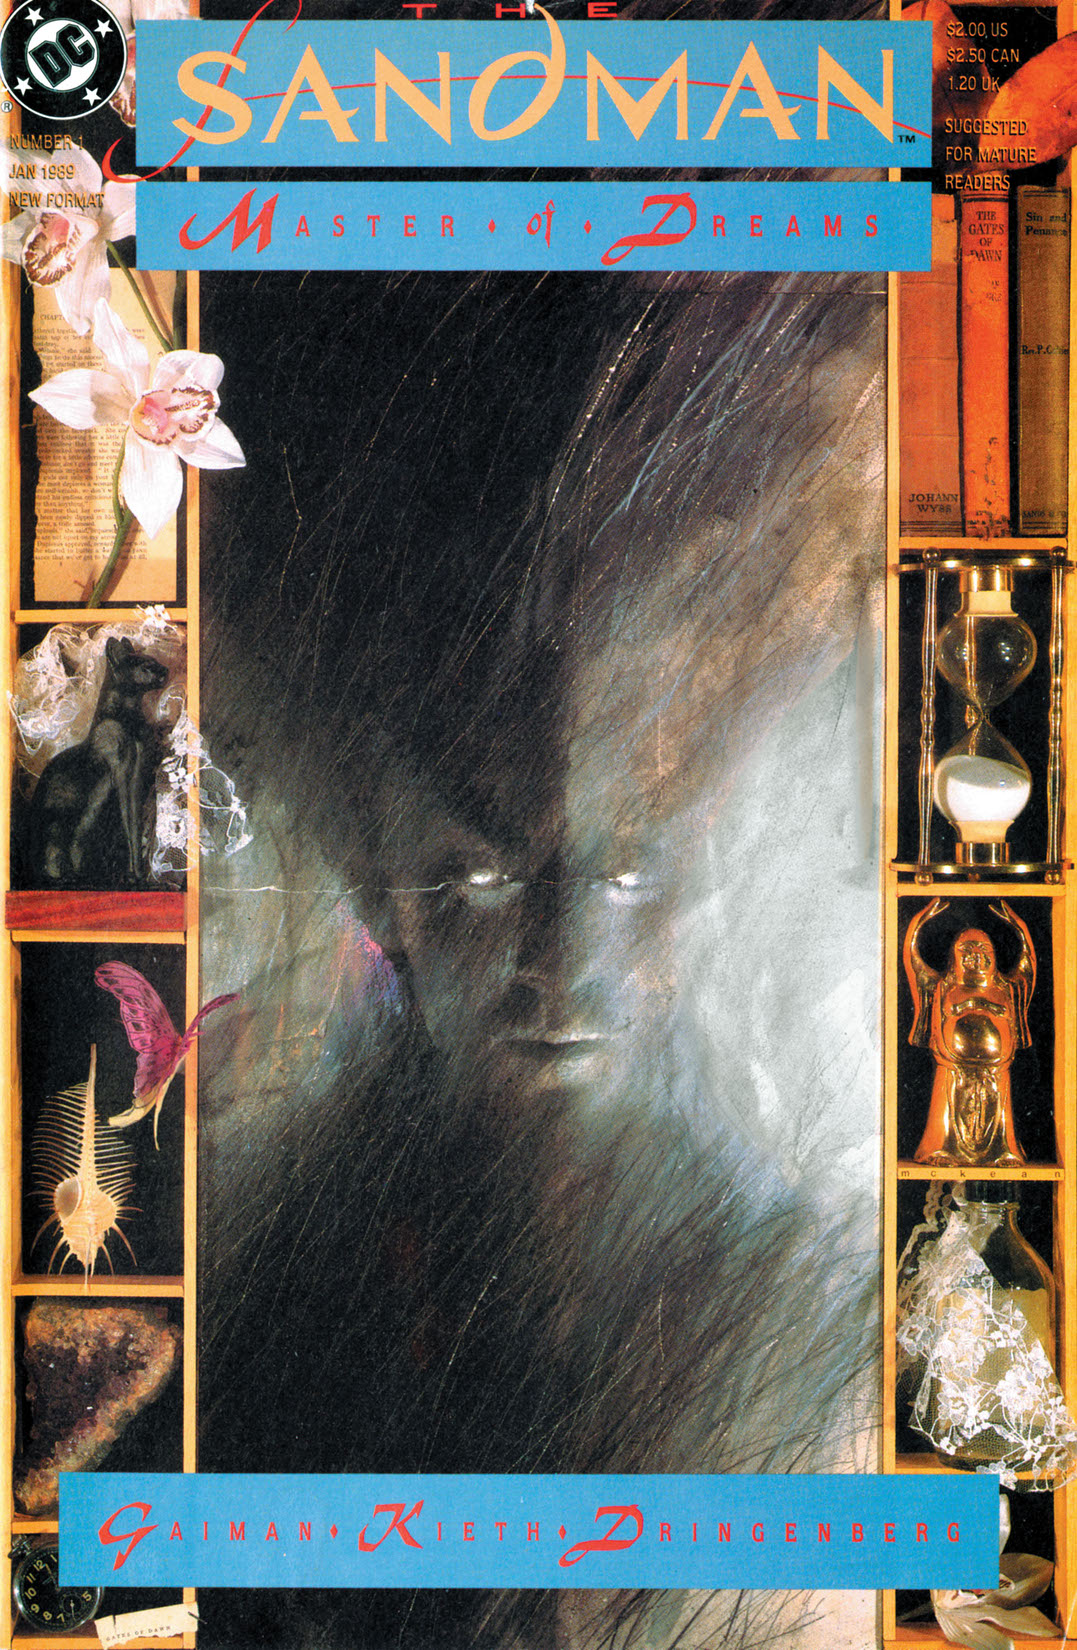 The Sandman #1 preview images